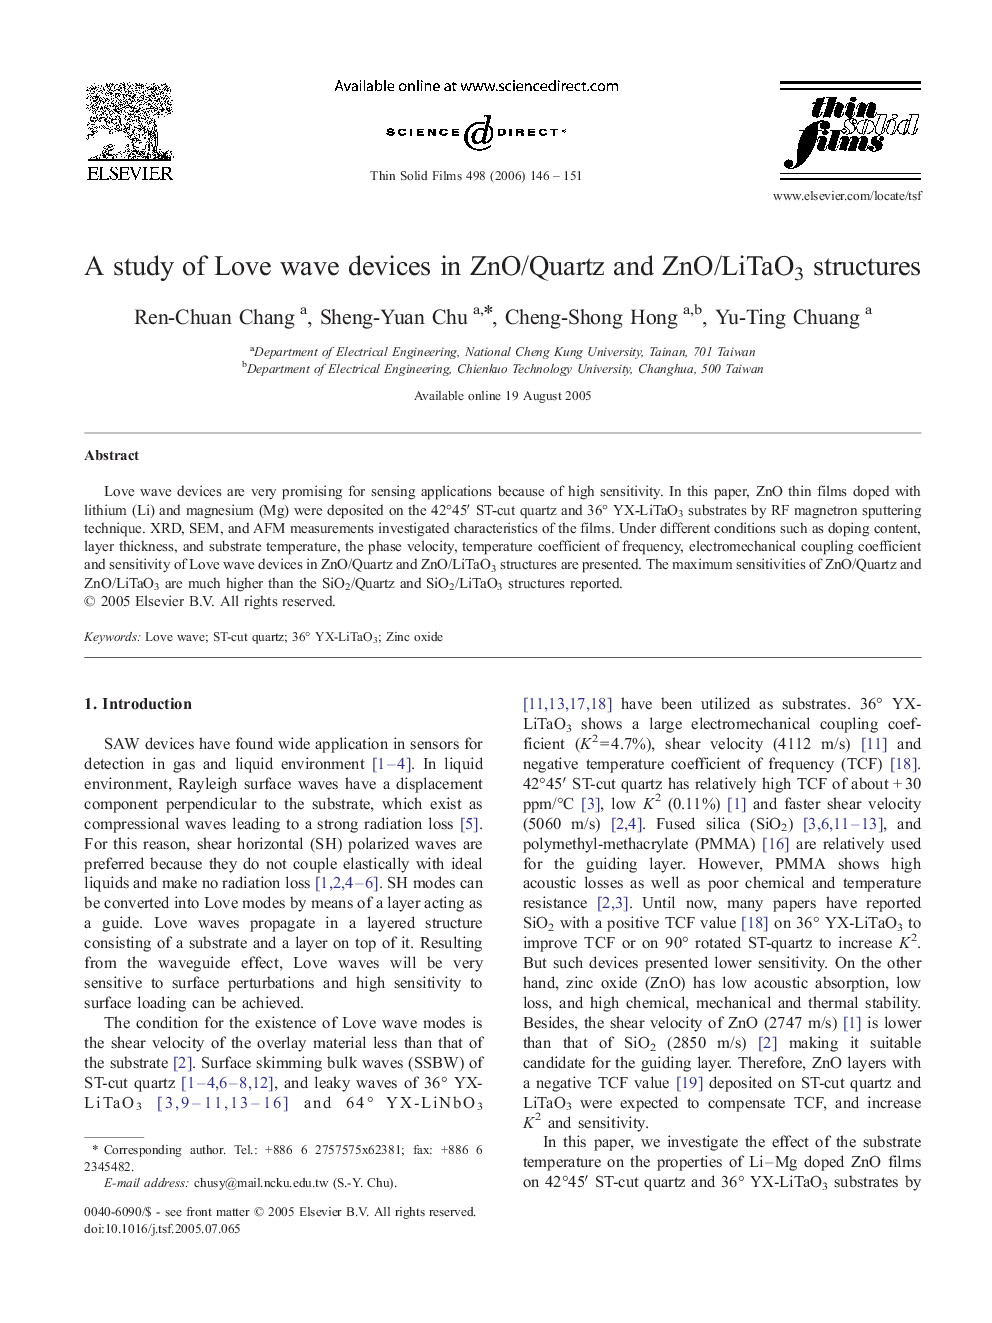 A study of Love wave devices in ZnO/Quartz and ZnO/LiTaO3 structures